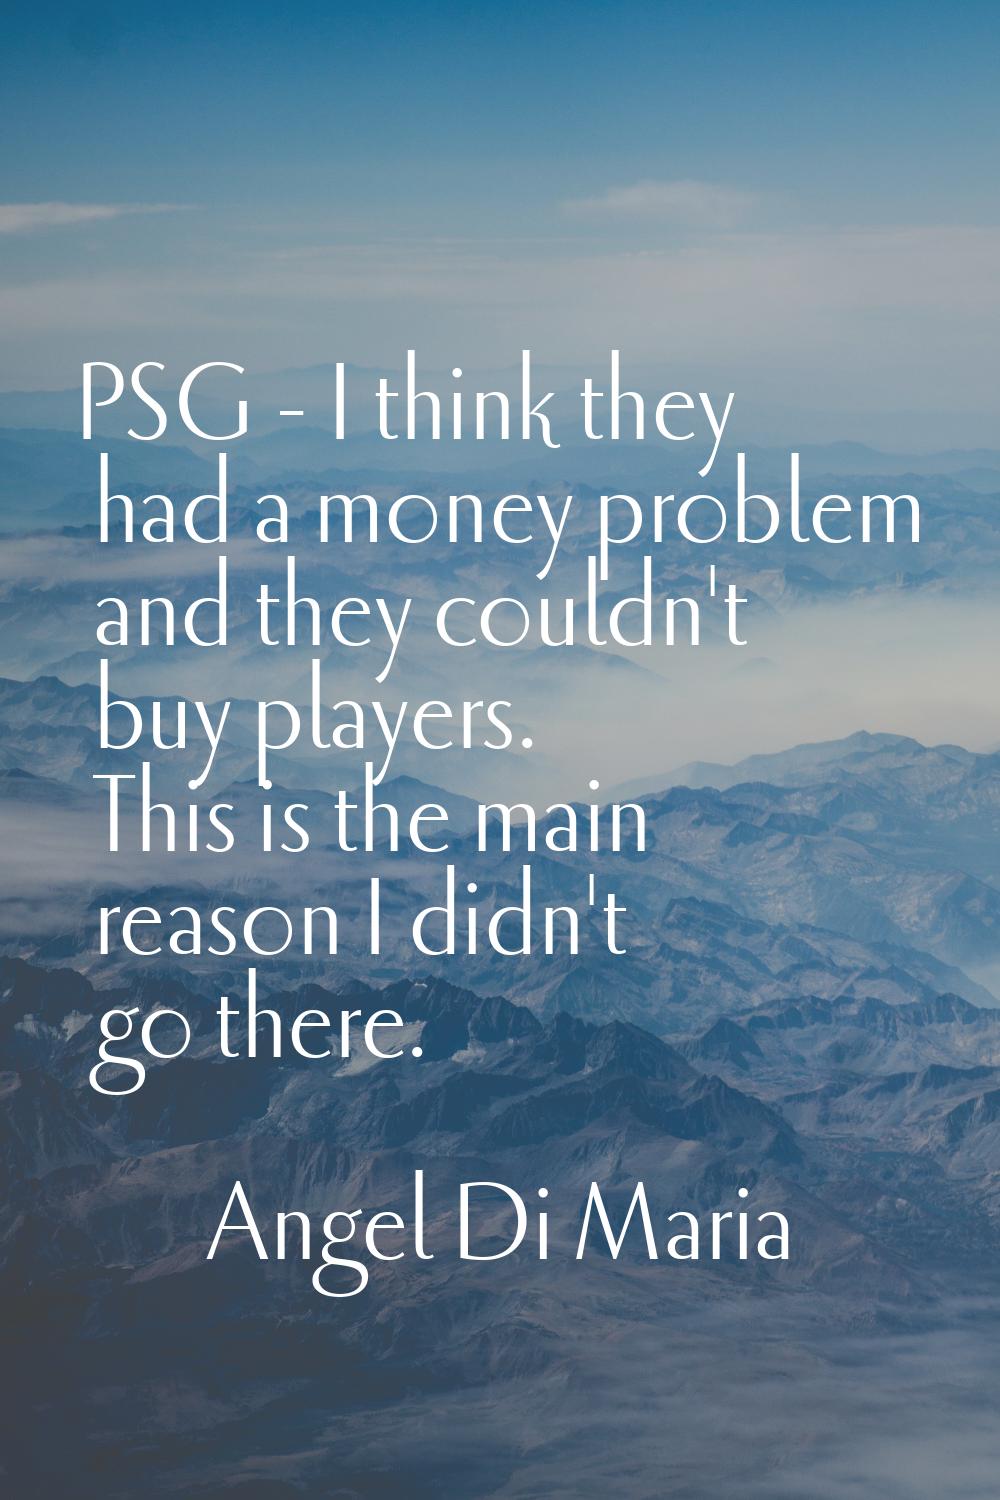 PSG - I think they had a money problem and they couldn't buy players. This is the main reason I did